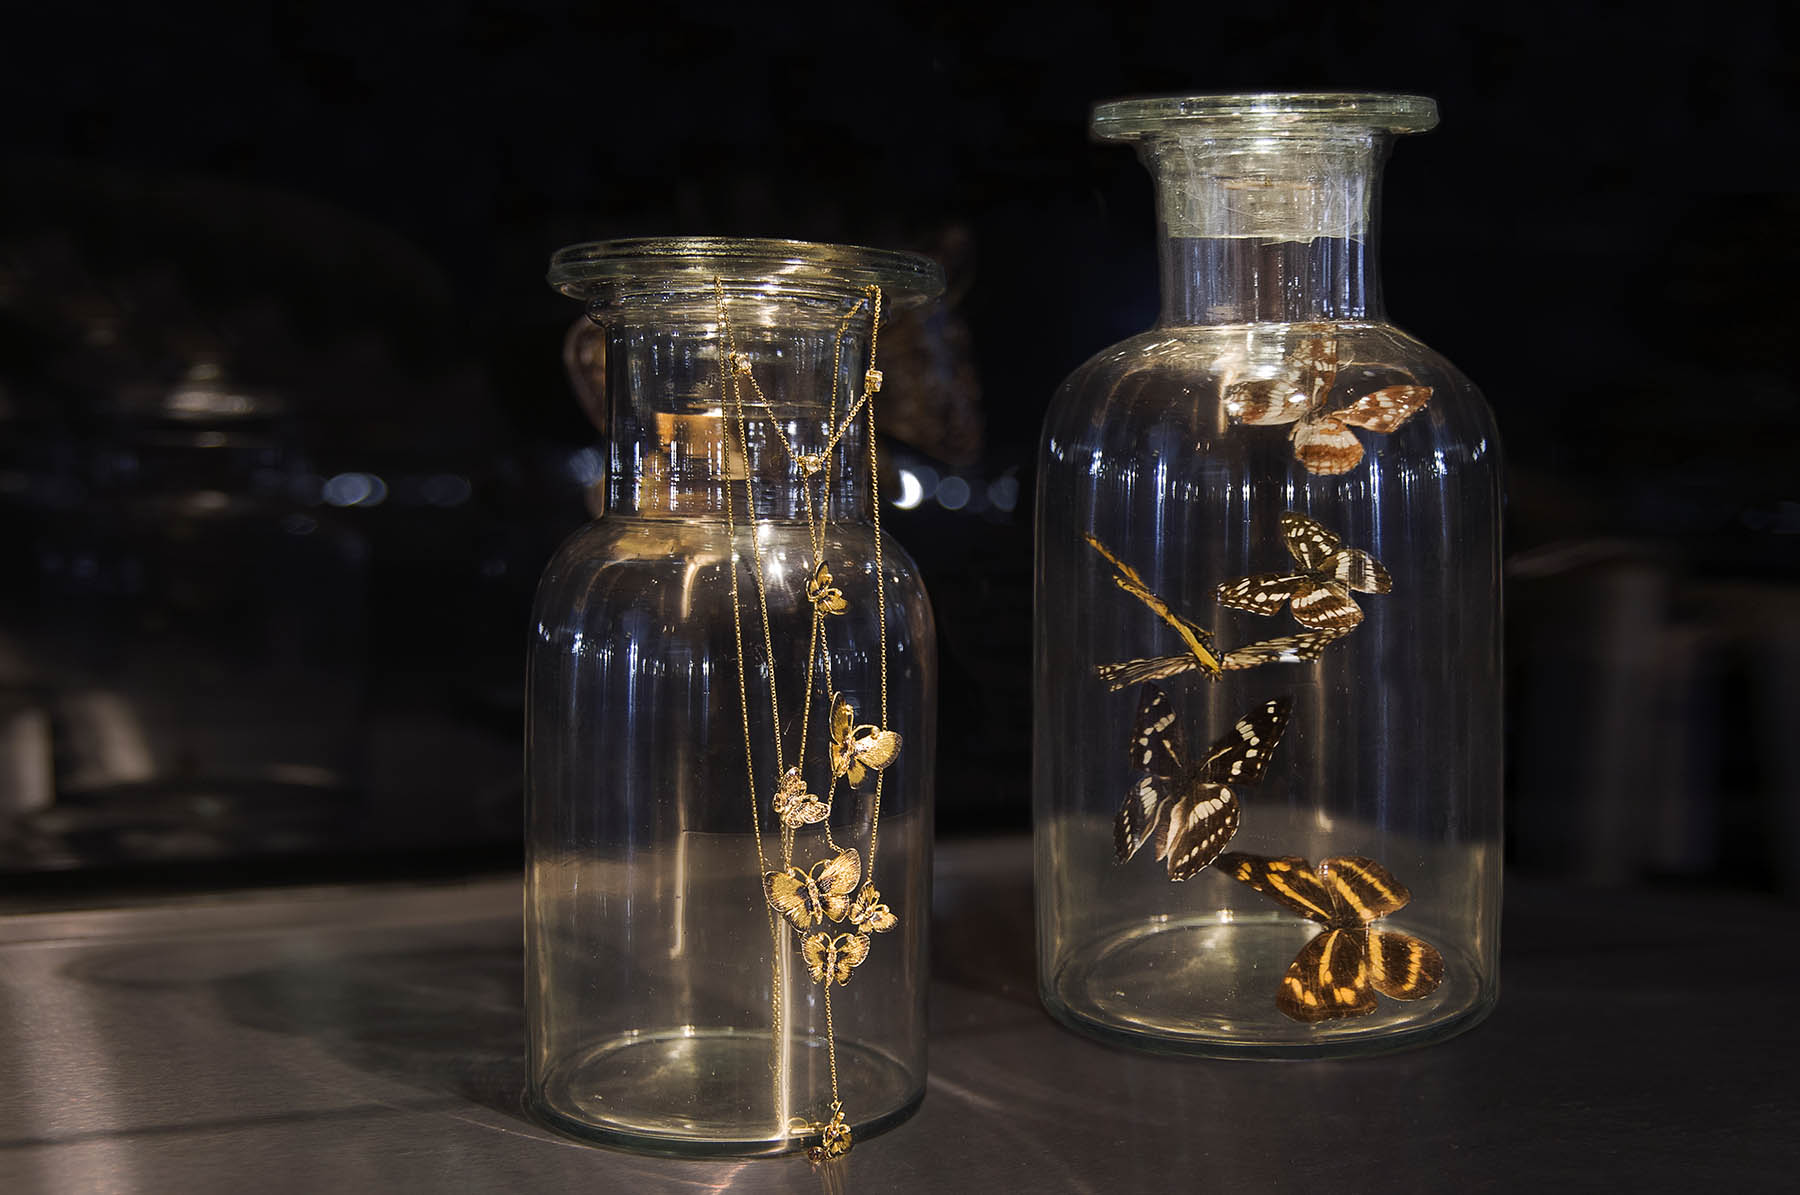 Annoushka Milestones Exhibition display cabinet - Taxidermy butterflies in glass jar and Annoushka butterfly pendant hanging on glass jar